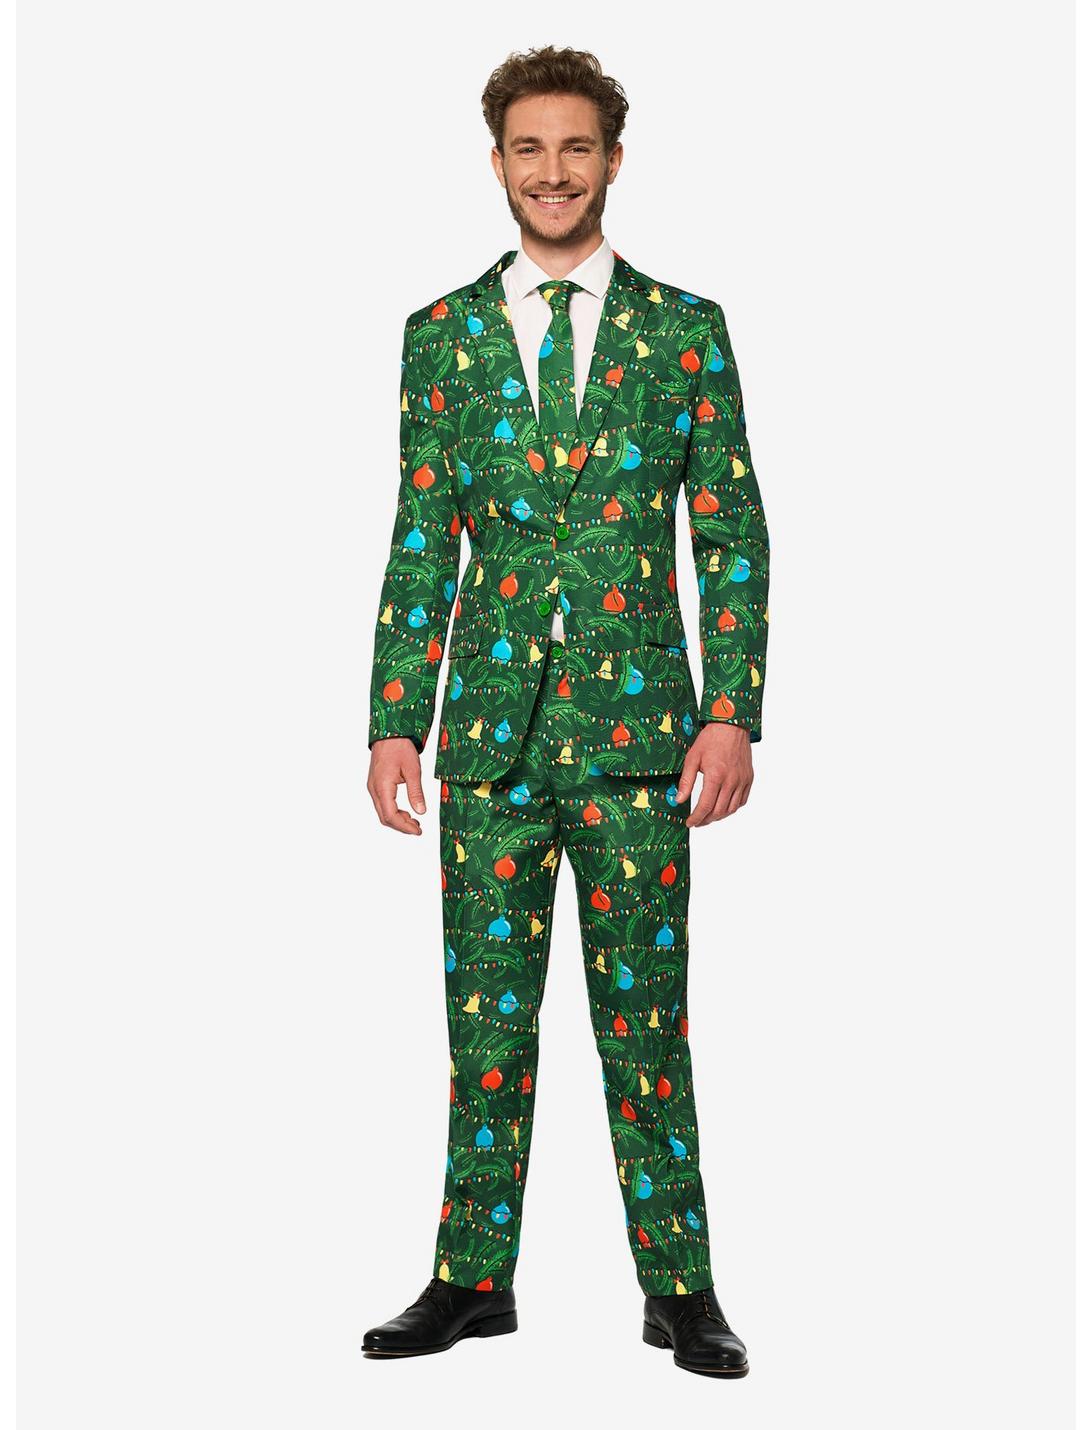 Suitmeister Men's Christmas Green Tree Christmas Light Up Suit, GREEN, hi-res